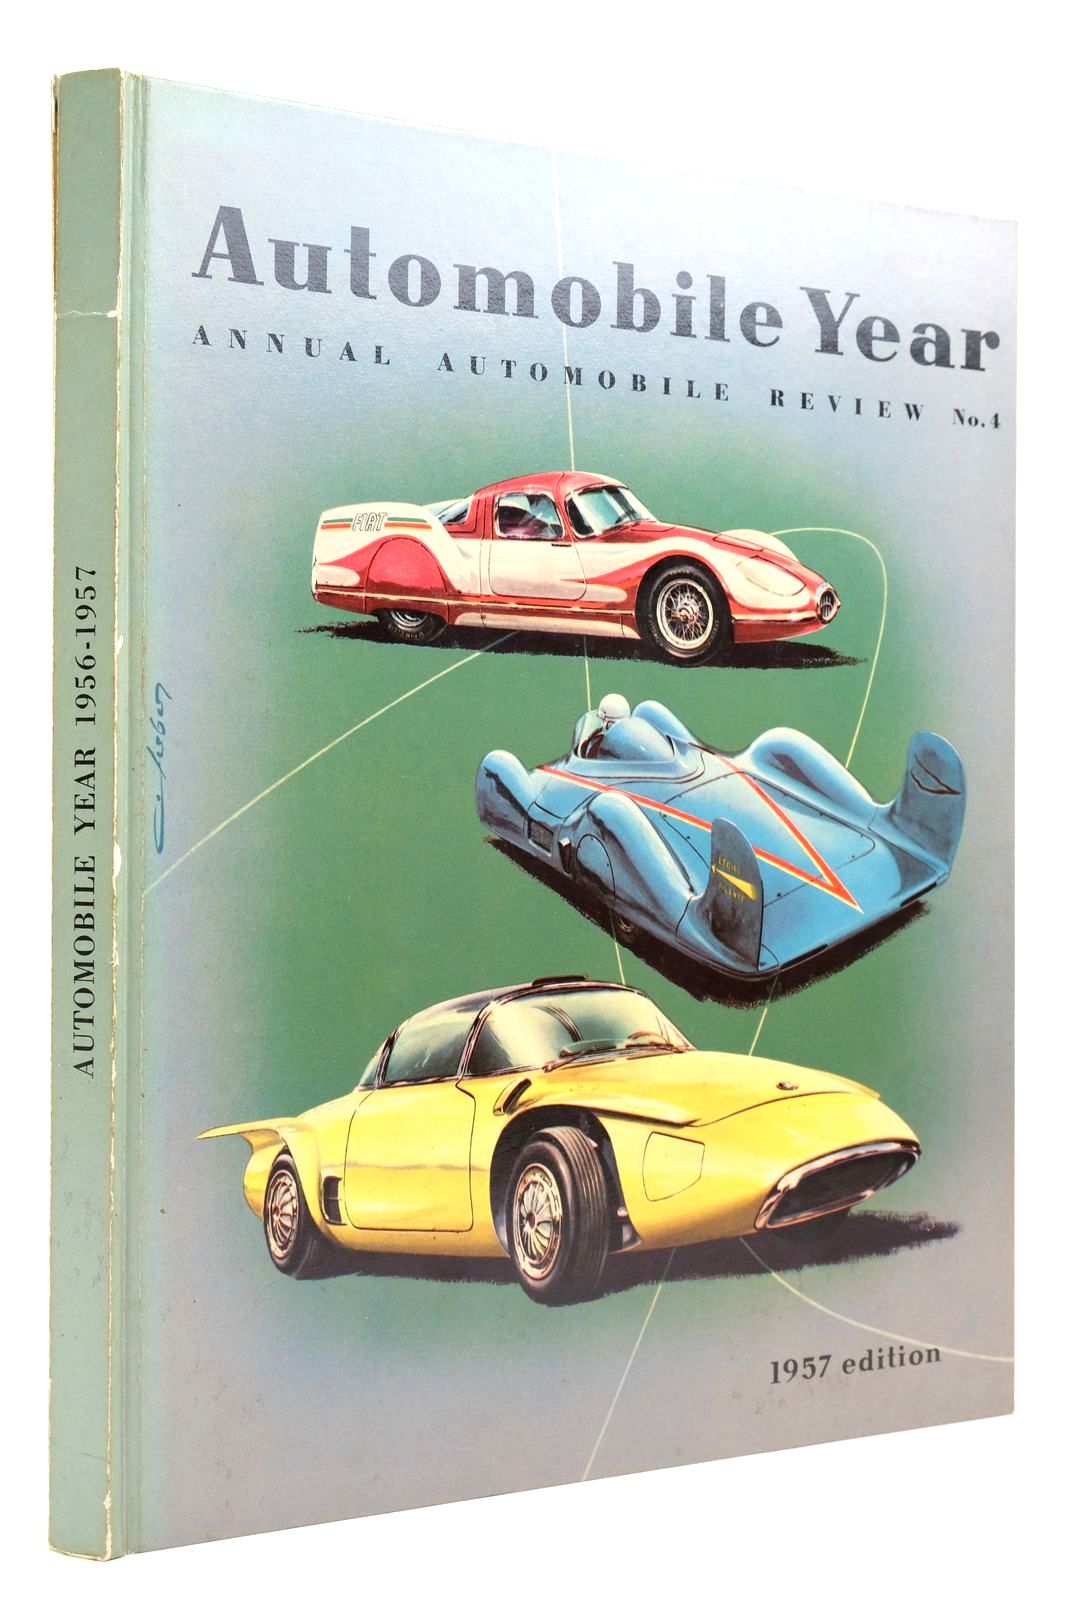 Photo of AUTOMOBILE YEAR 1956-1957 ANNUAL AUTOMOBILE REVIEW No. 4 published by Edita S.A. Lausanne (STOCK CODE: 2140280)  for sale by Stella & Rose's Books